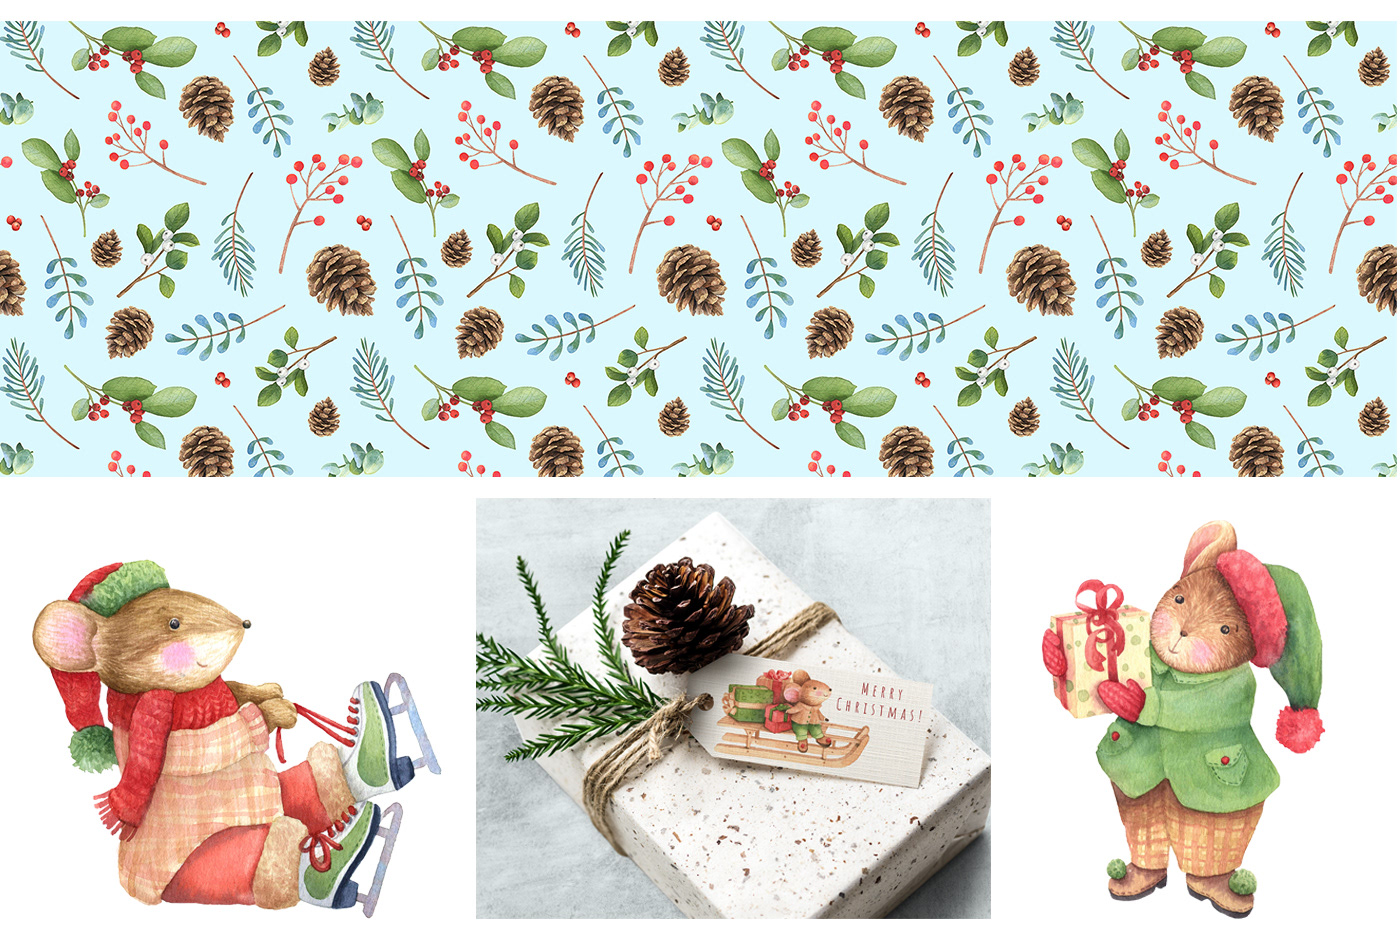 Seamless pattern with winter plants. Cute mouse characters. Watercolor illustrations.